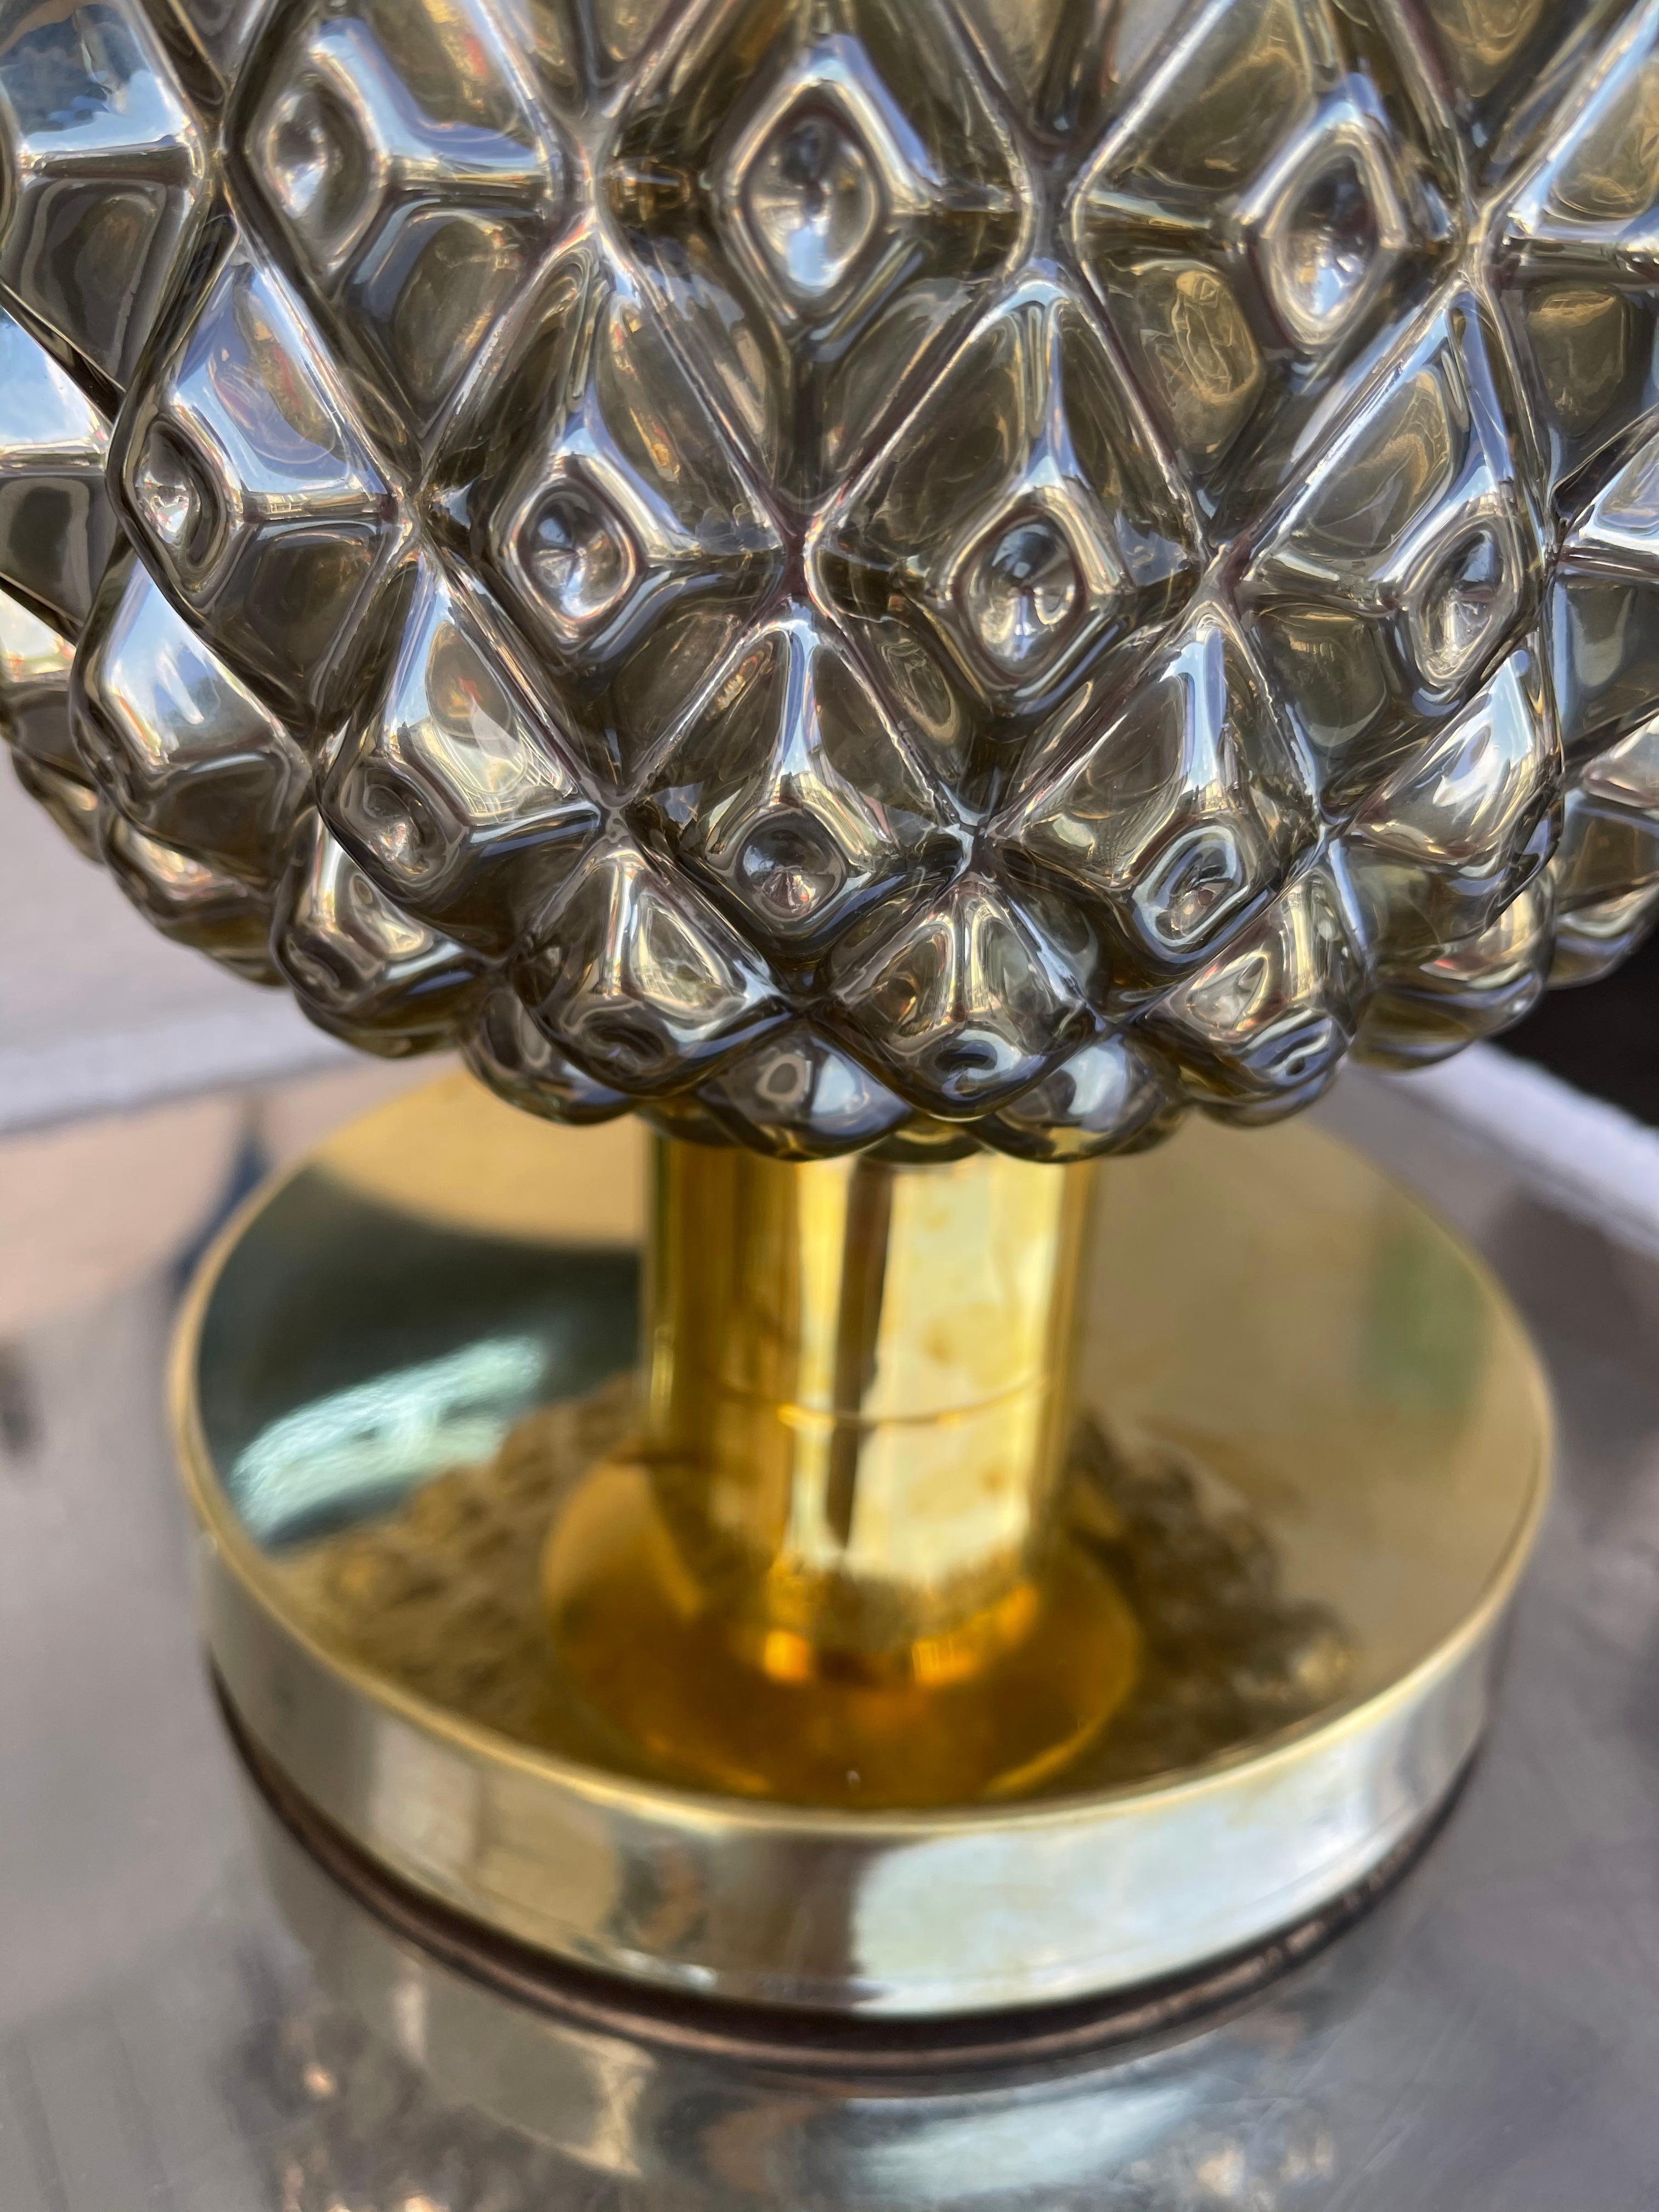 Pair of table or bedside lamps silver goldish gold pineapple palm tree Murano glass and brass. In the mood of Maison Jansen, Charles, Hollywood regency, Veronese, Venini, Vistosi, La Murrina, Mazzega.

Demo shades not included. Measurements in